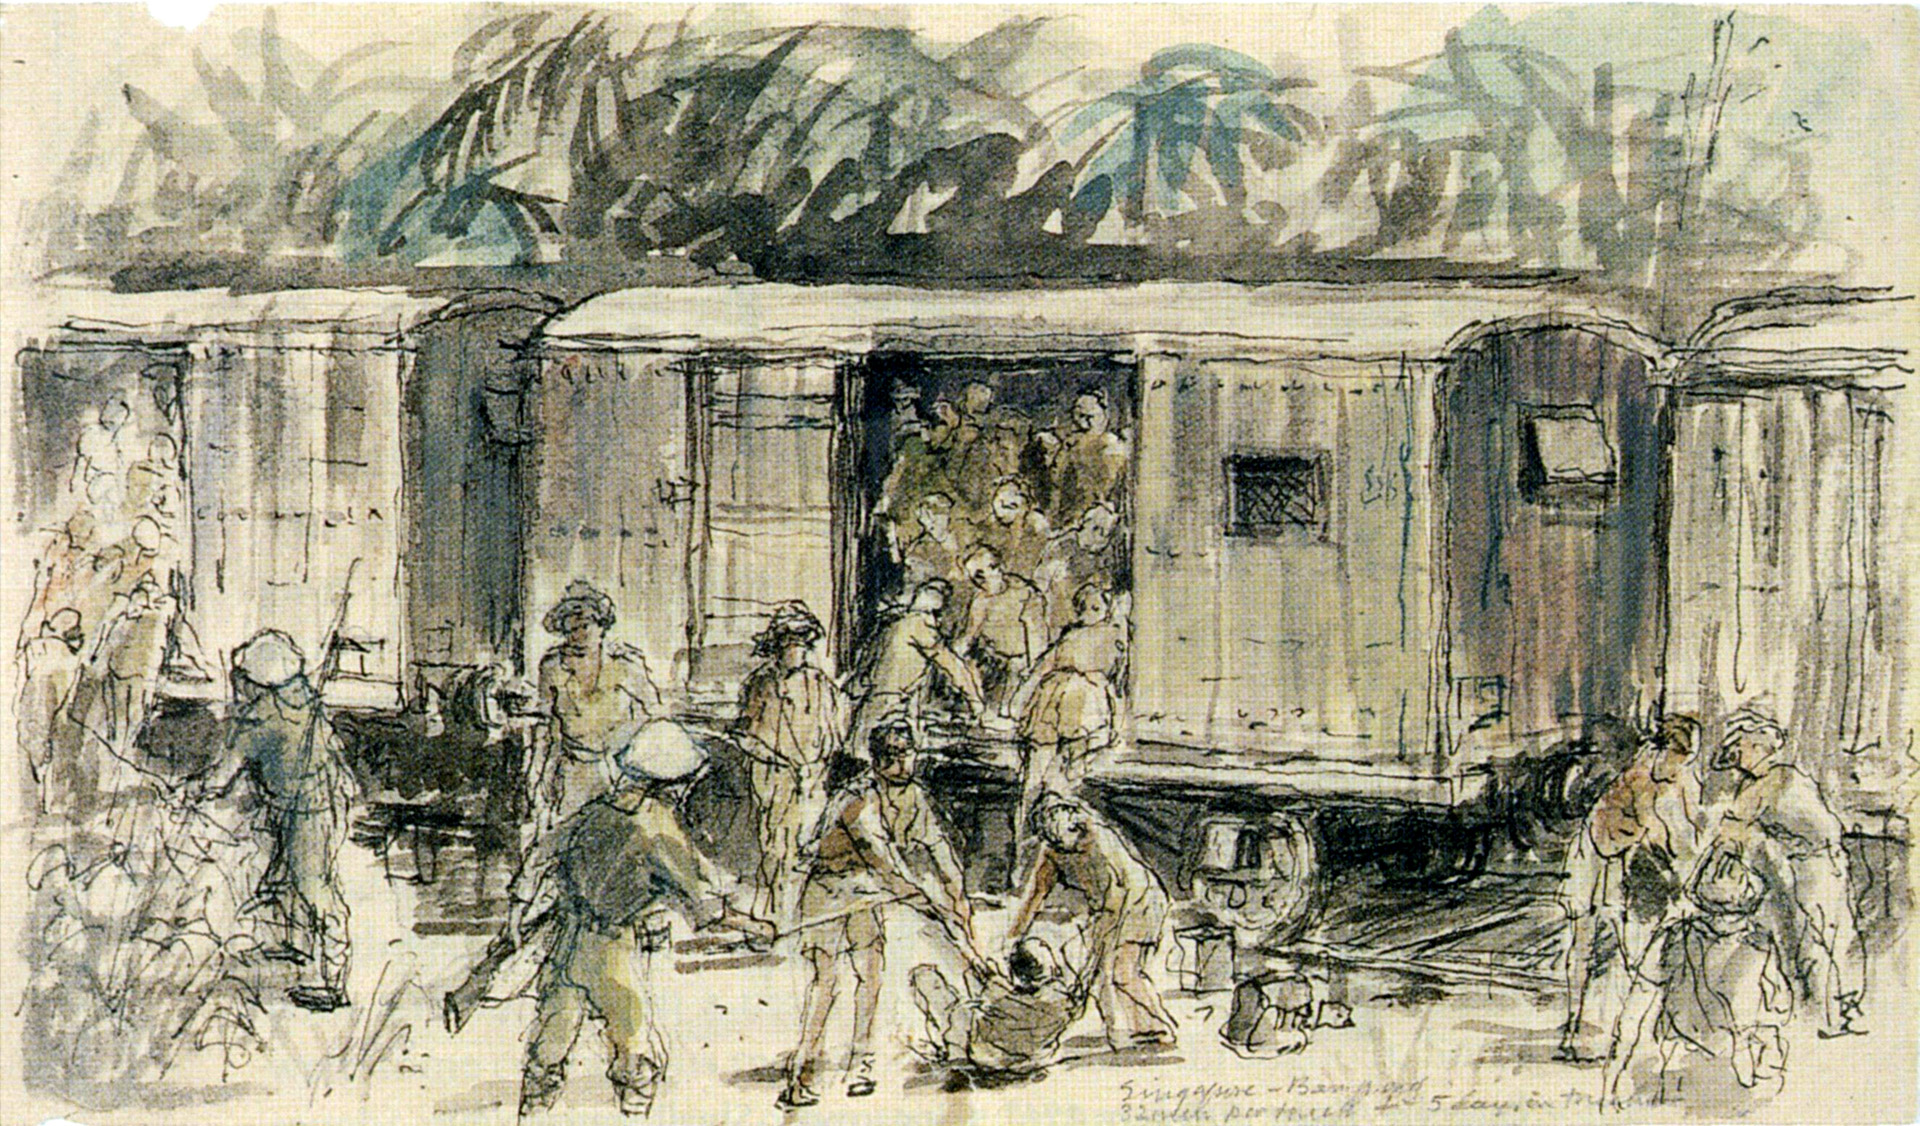 While Japanese guards beat a sick or reluctant prisoner, other POWs climb into cattle cars that will take them to the worksite—a five-day journey. Sketch by POW Jack Chalker.